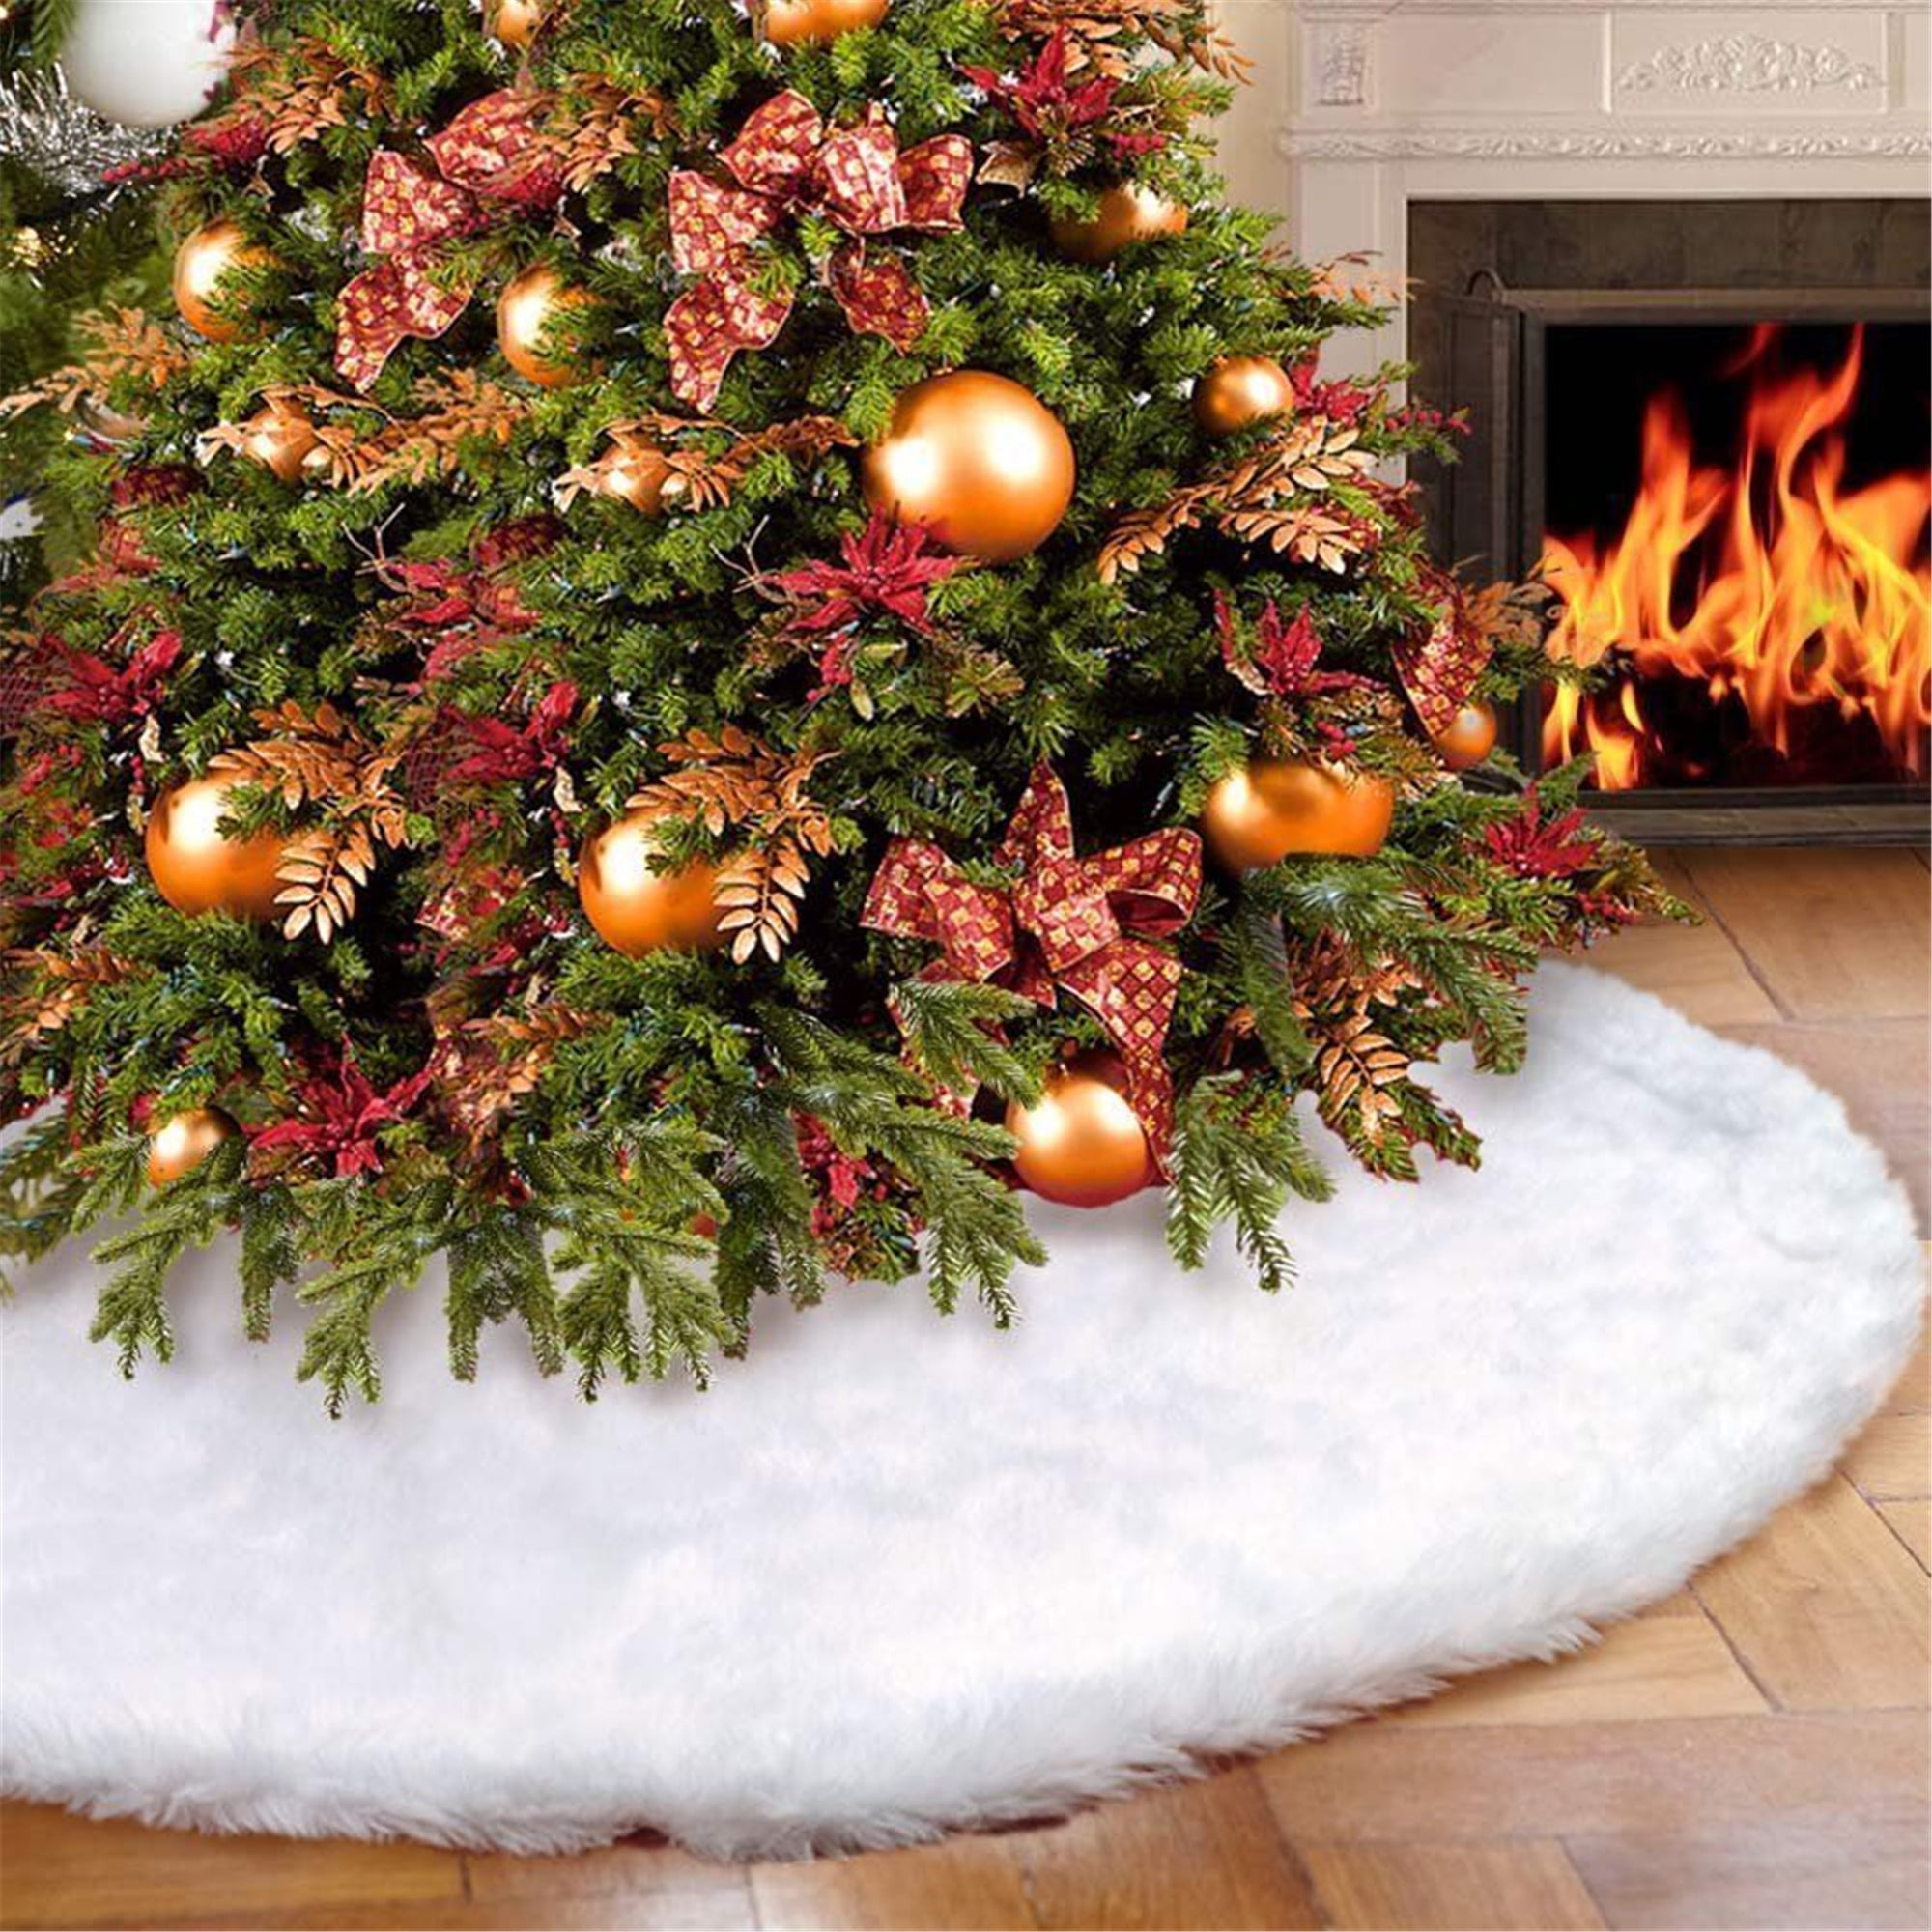 Blue Christmas Tree Skirt,36 in Fur Tree Skirt with White Snowflakes for Holiday 